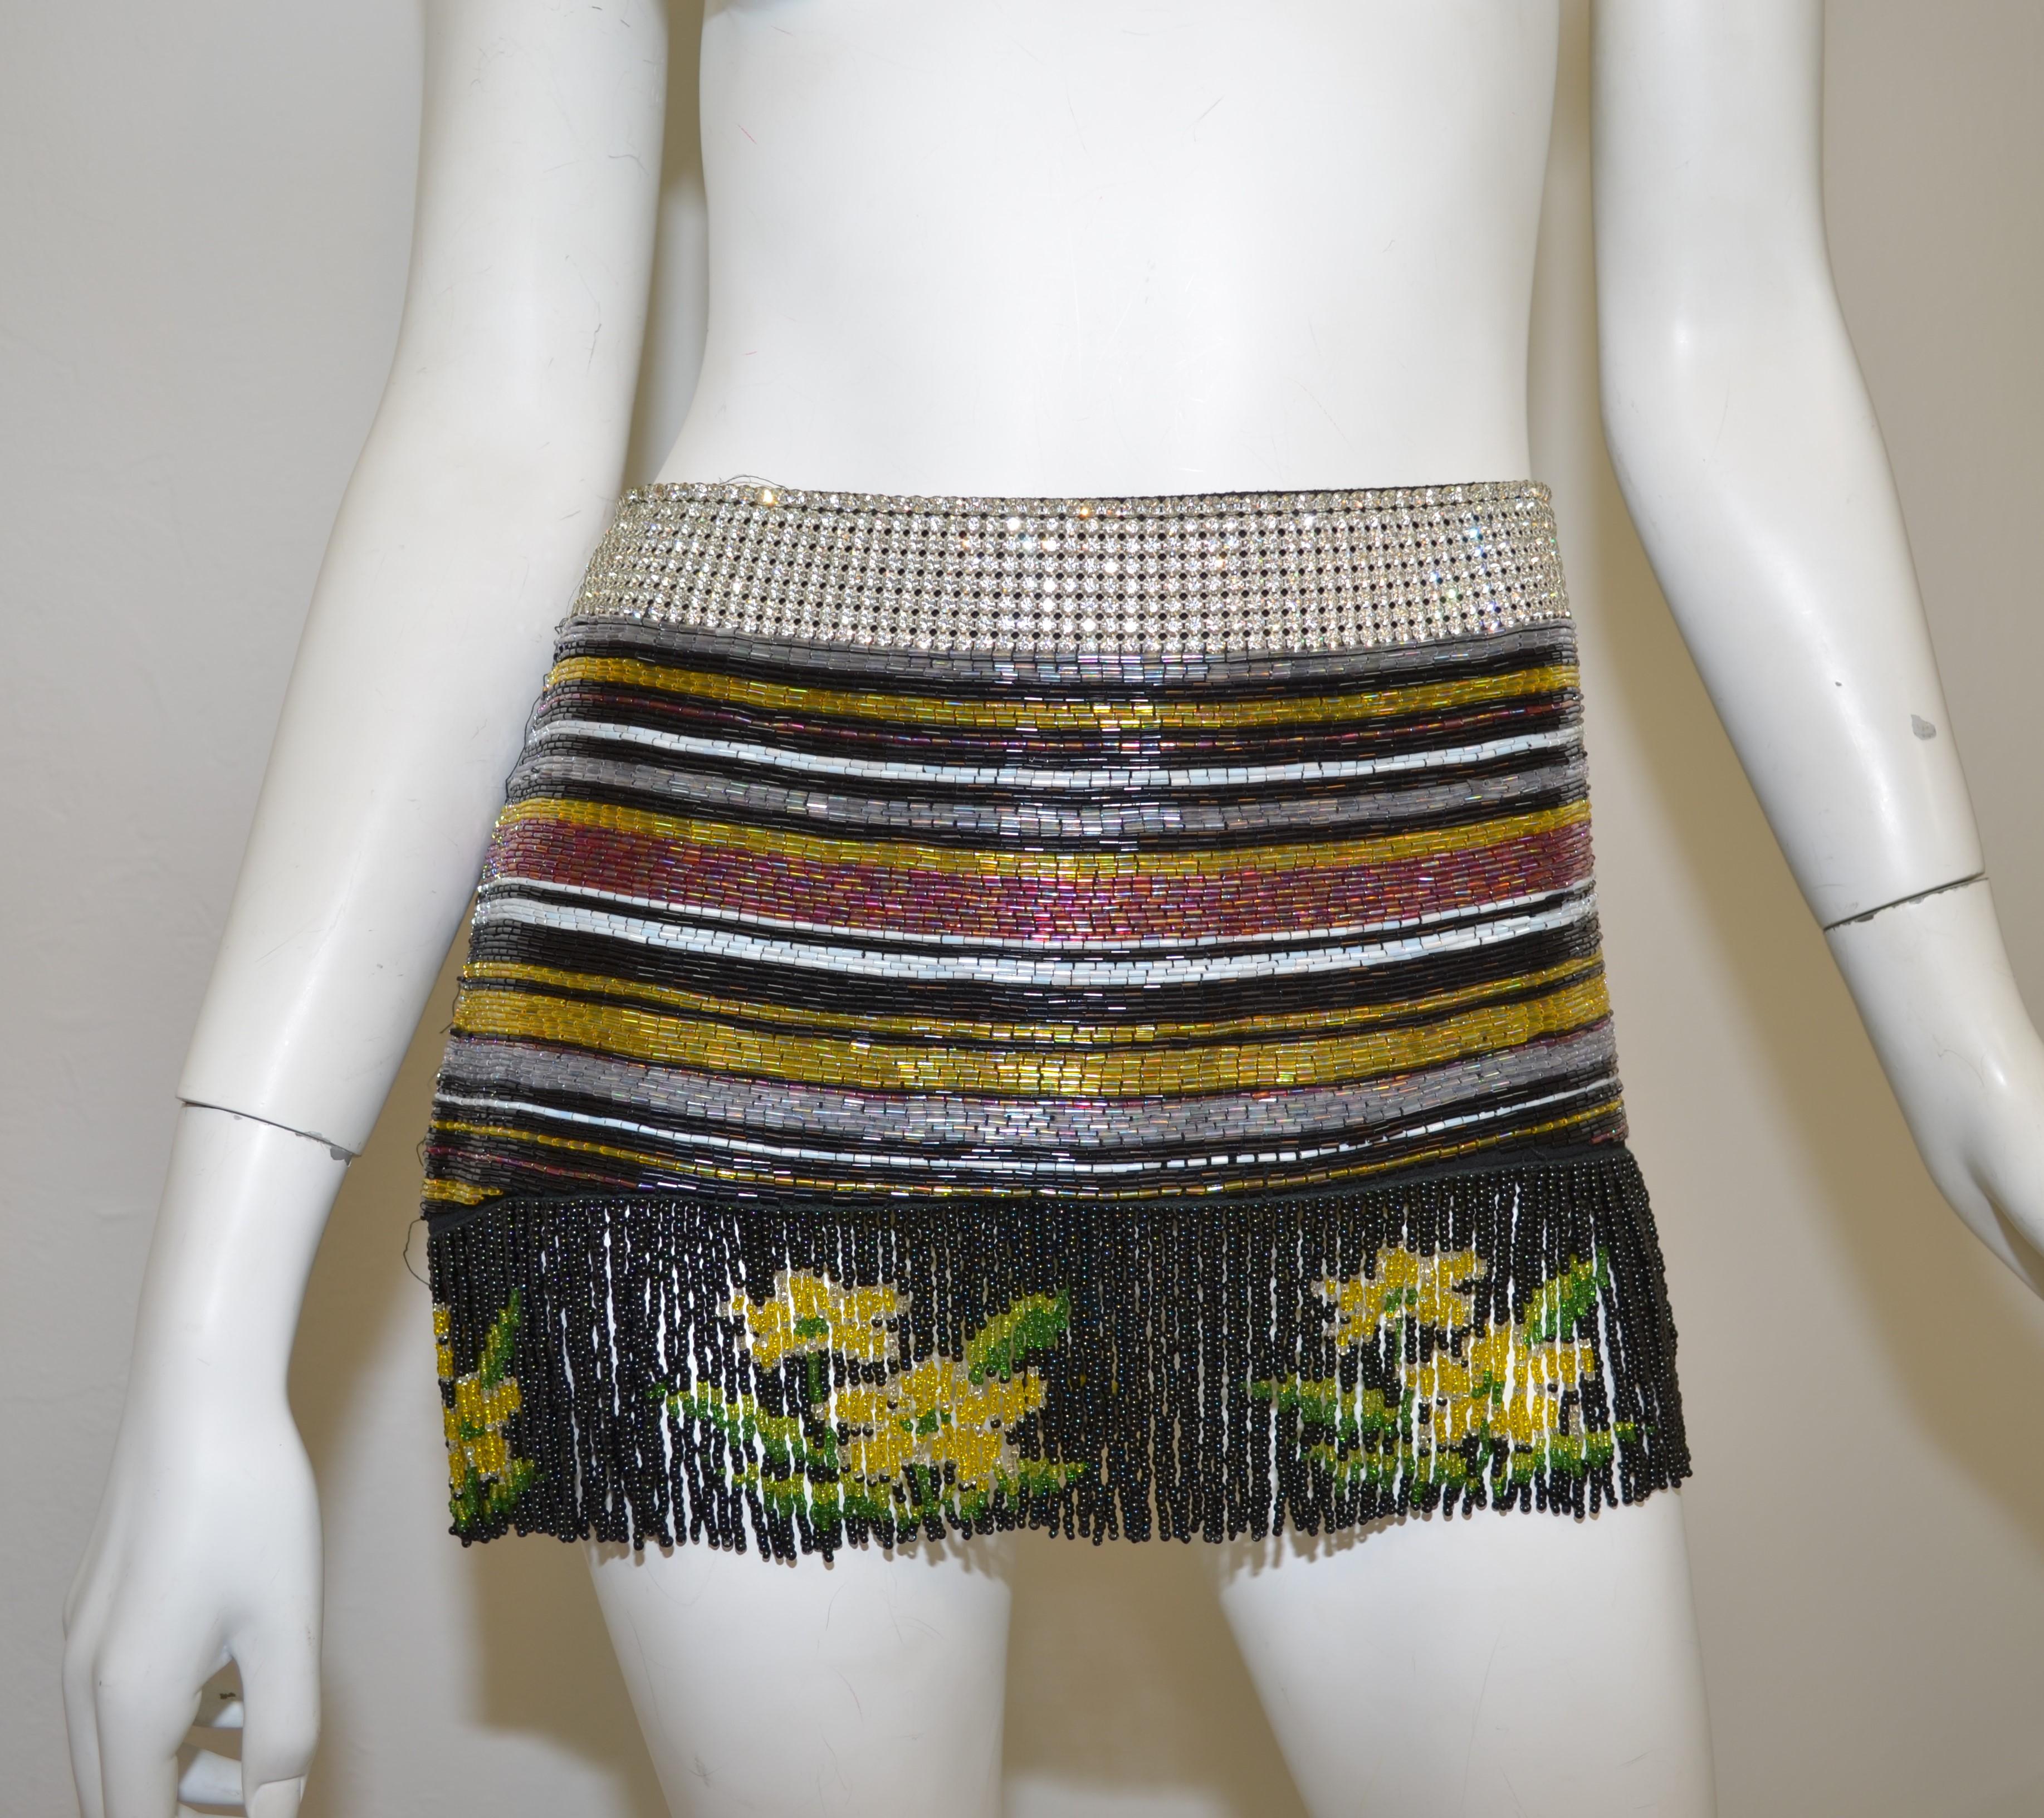 Dolce & Gabbana skirt from Spring/Summer 2000 collection. Multicolor and fully beaded with a fringed hem, rhinestone waist band with a side zipper closure, size 42, and fully lined. Made in Italy.

Measurements:
Waist 33”, hips 38”, length 12”
